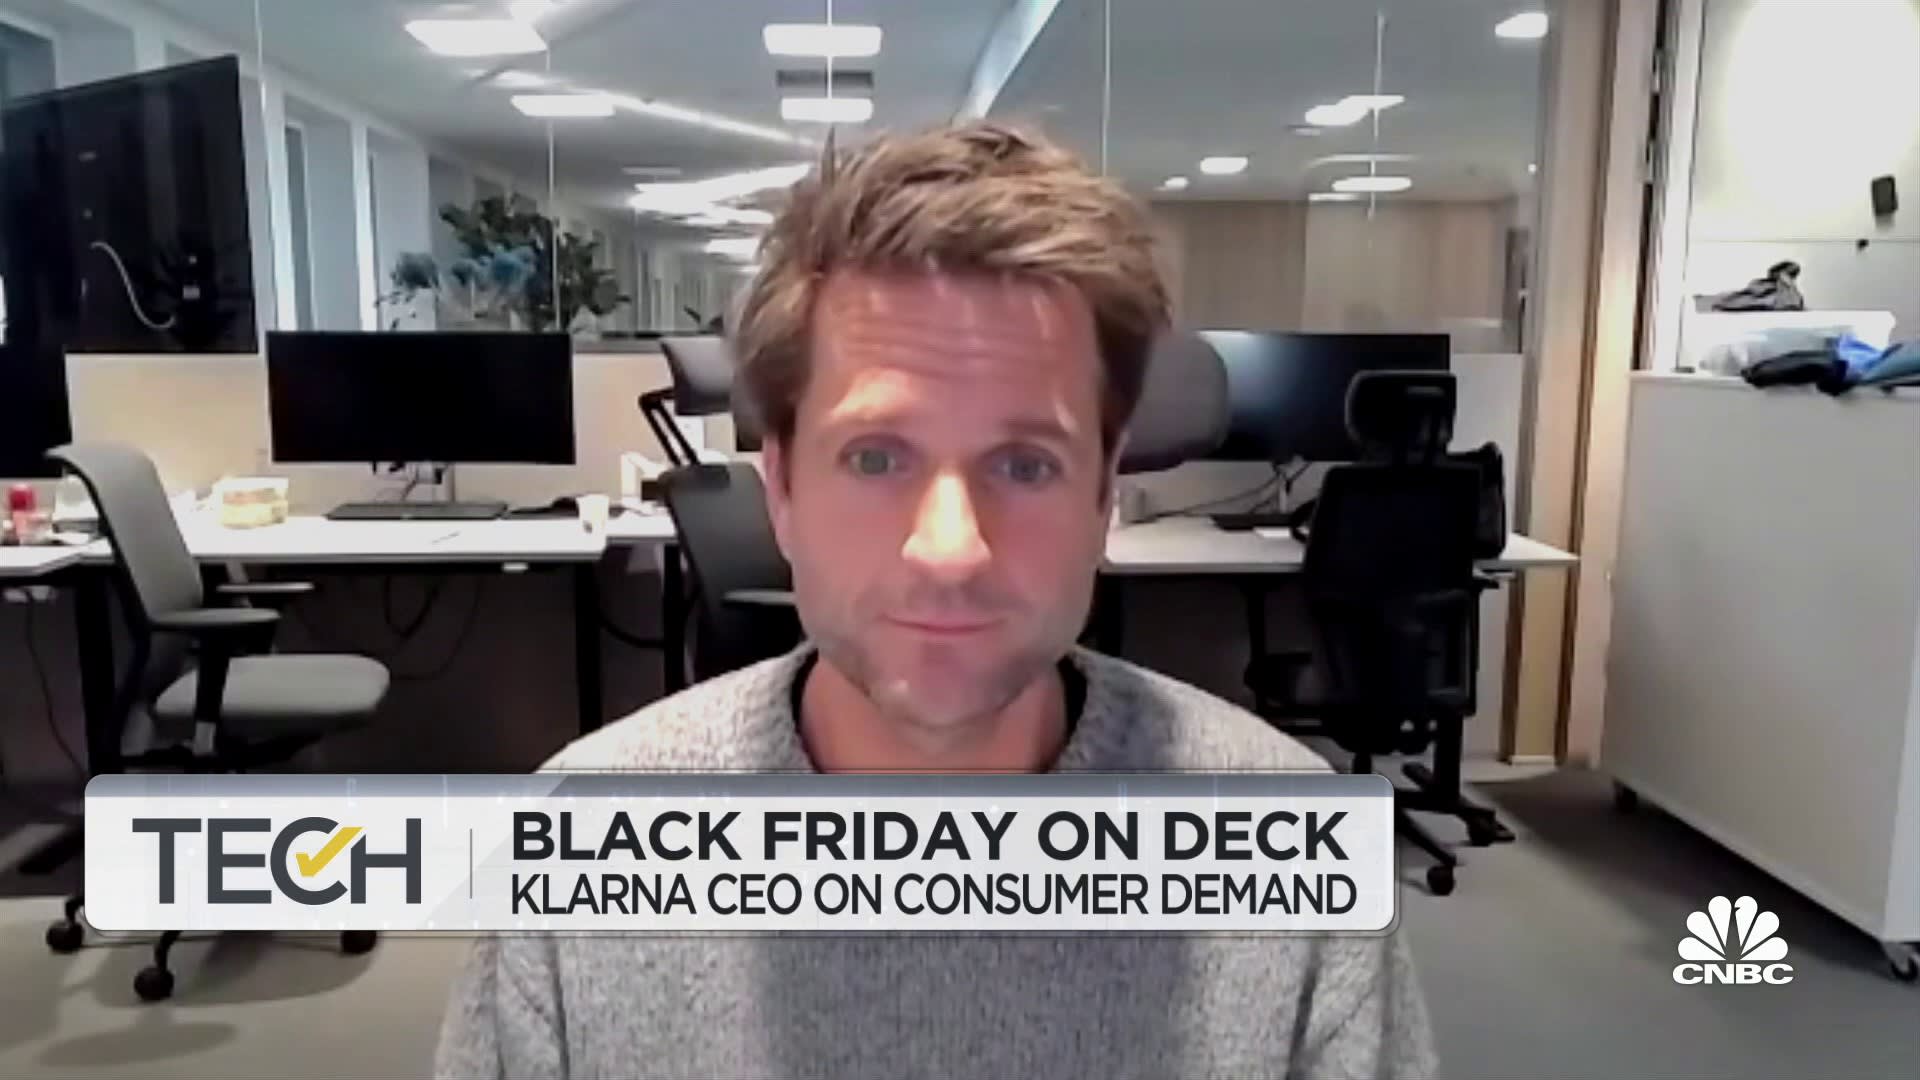 The journey over shopping trend is setting up to reverse, claims Klarna CEO